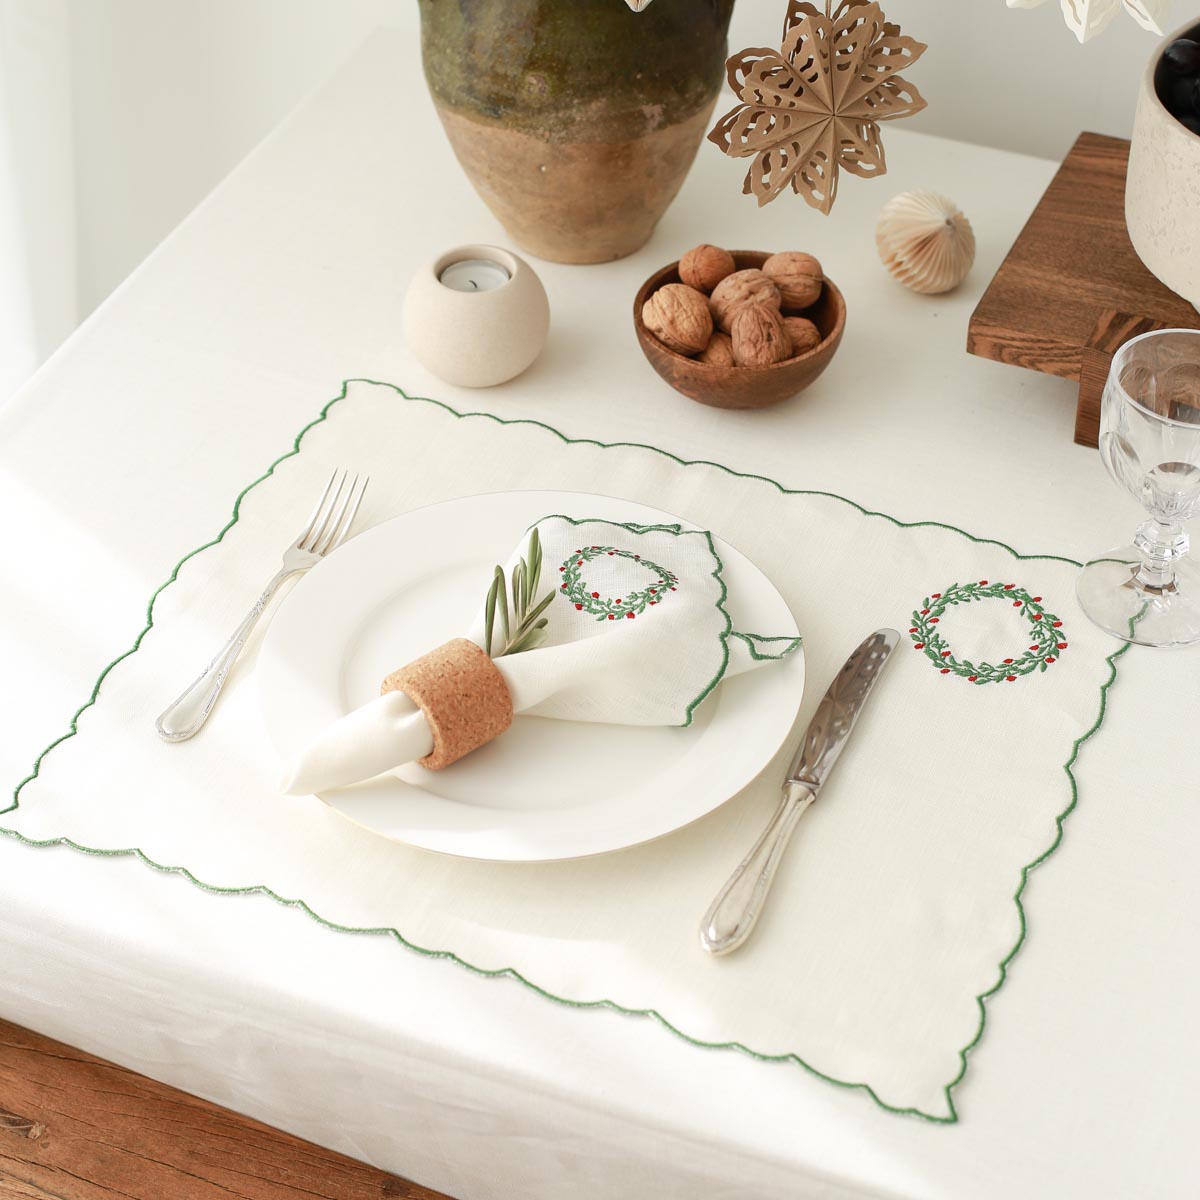 Wreath Embroidery Linen Placemat (Set of 2)